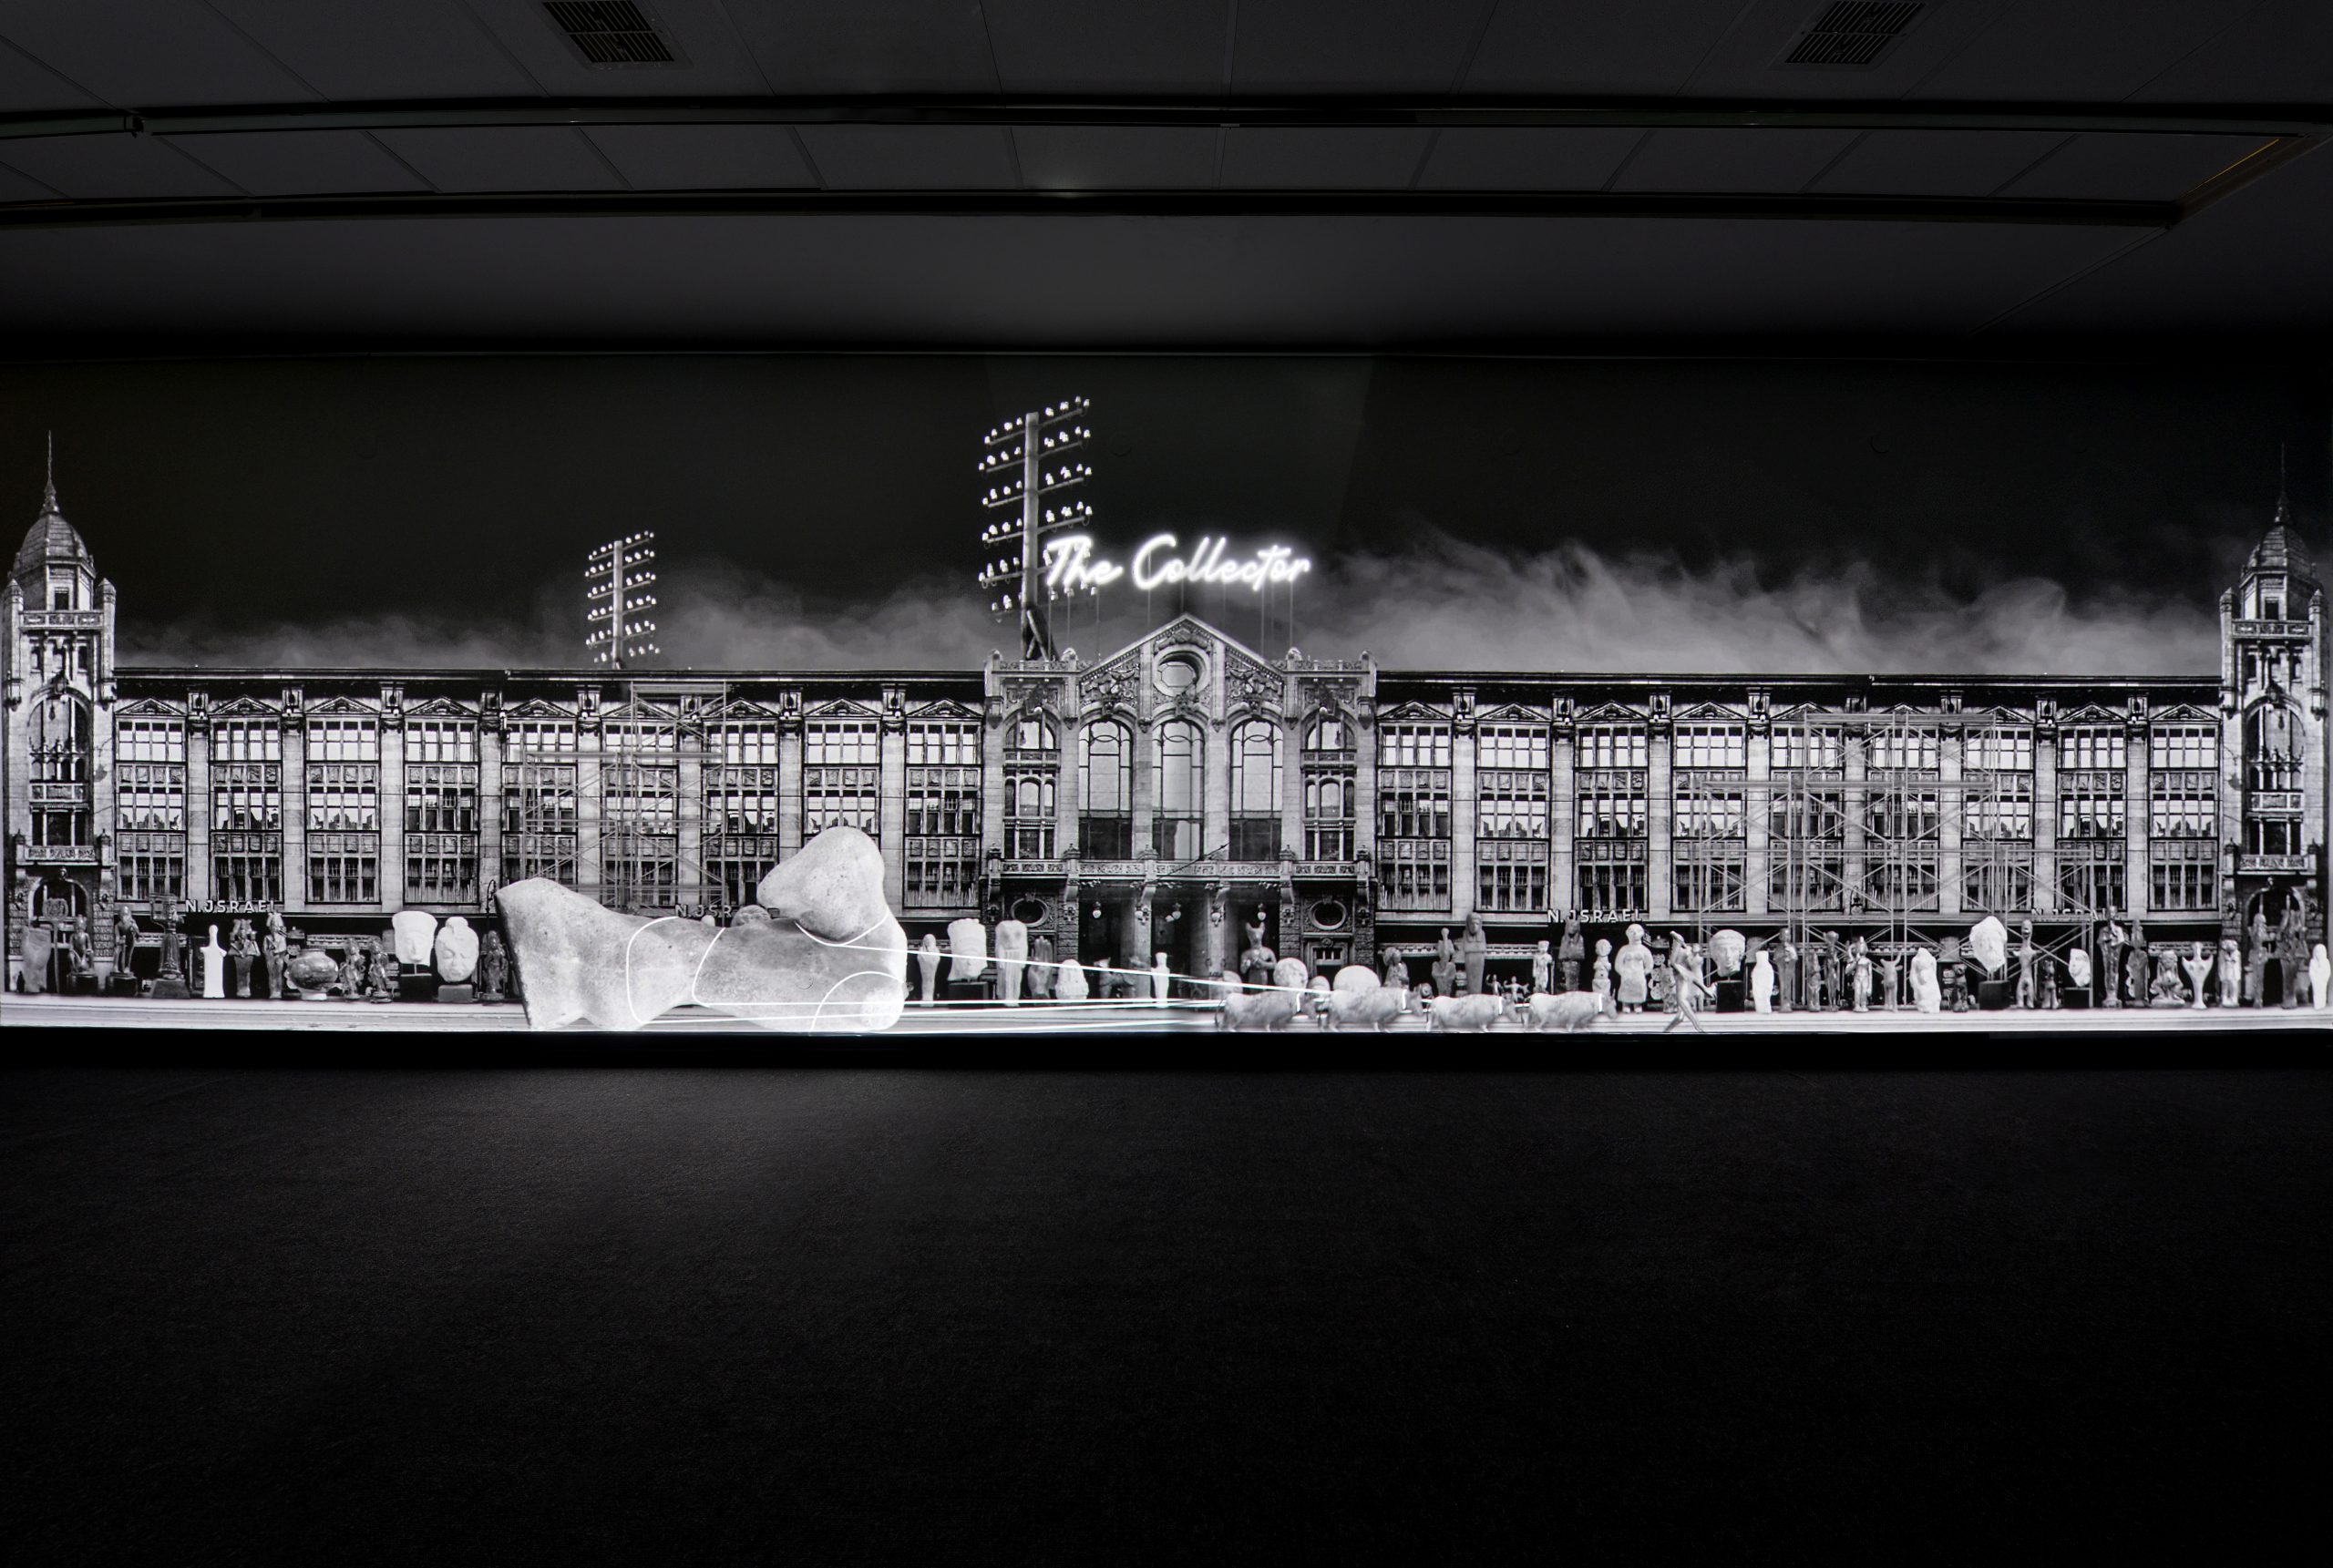 "The Collector", 
2021, 
two channel HD video & animation installation,
projection size: 10 meters (2 projections),
black & white, stereo sound, 
dimension variable,
duration: 3 min loop